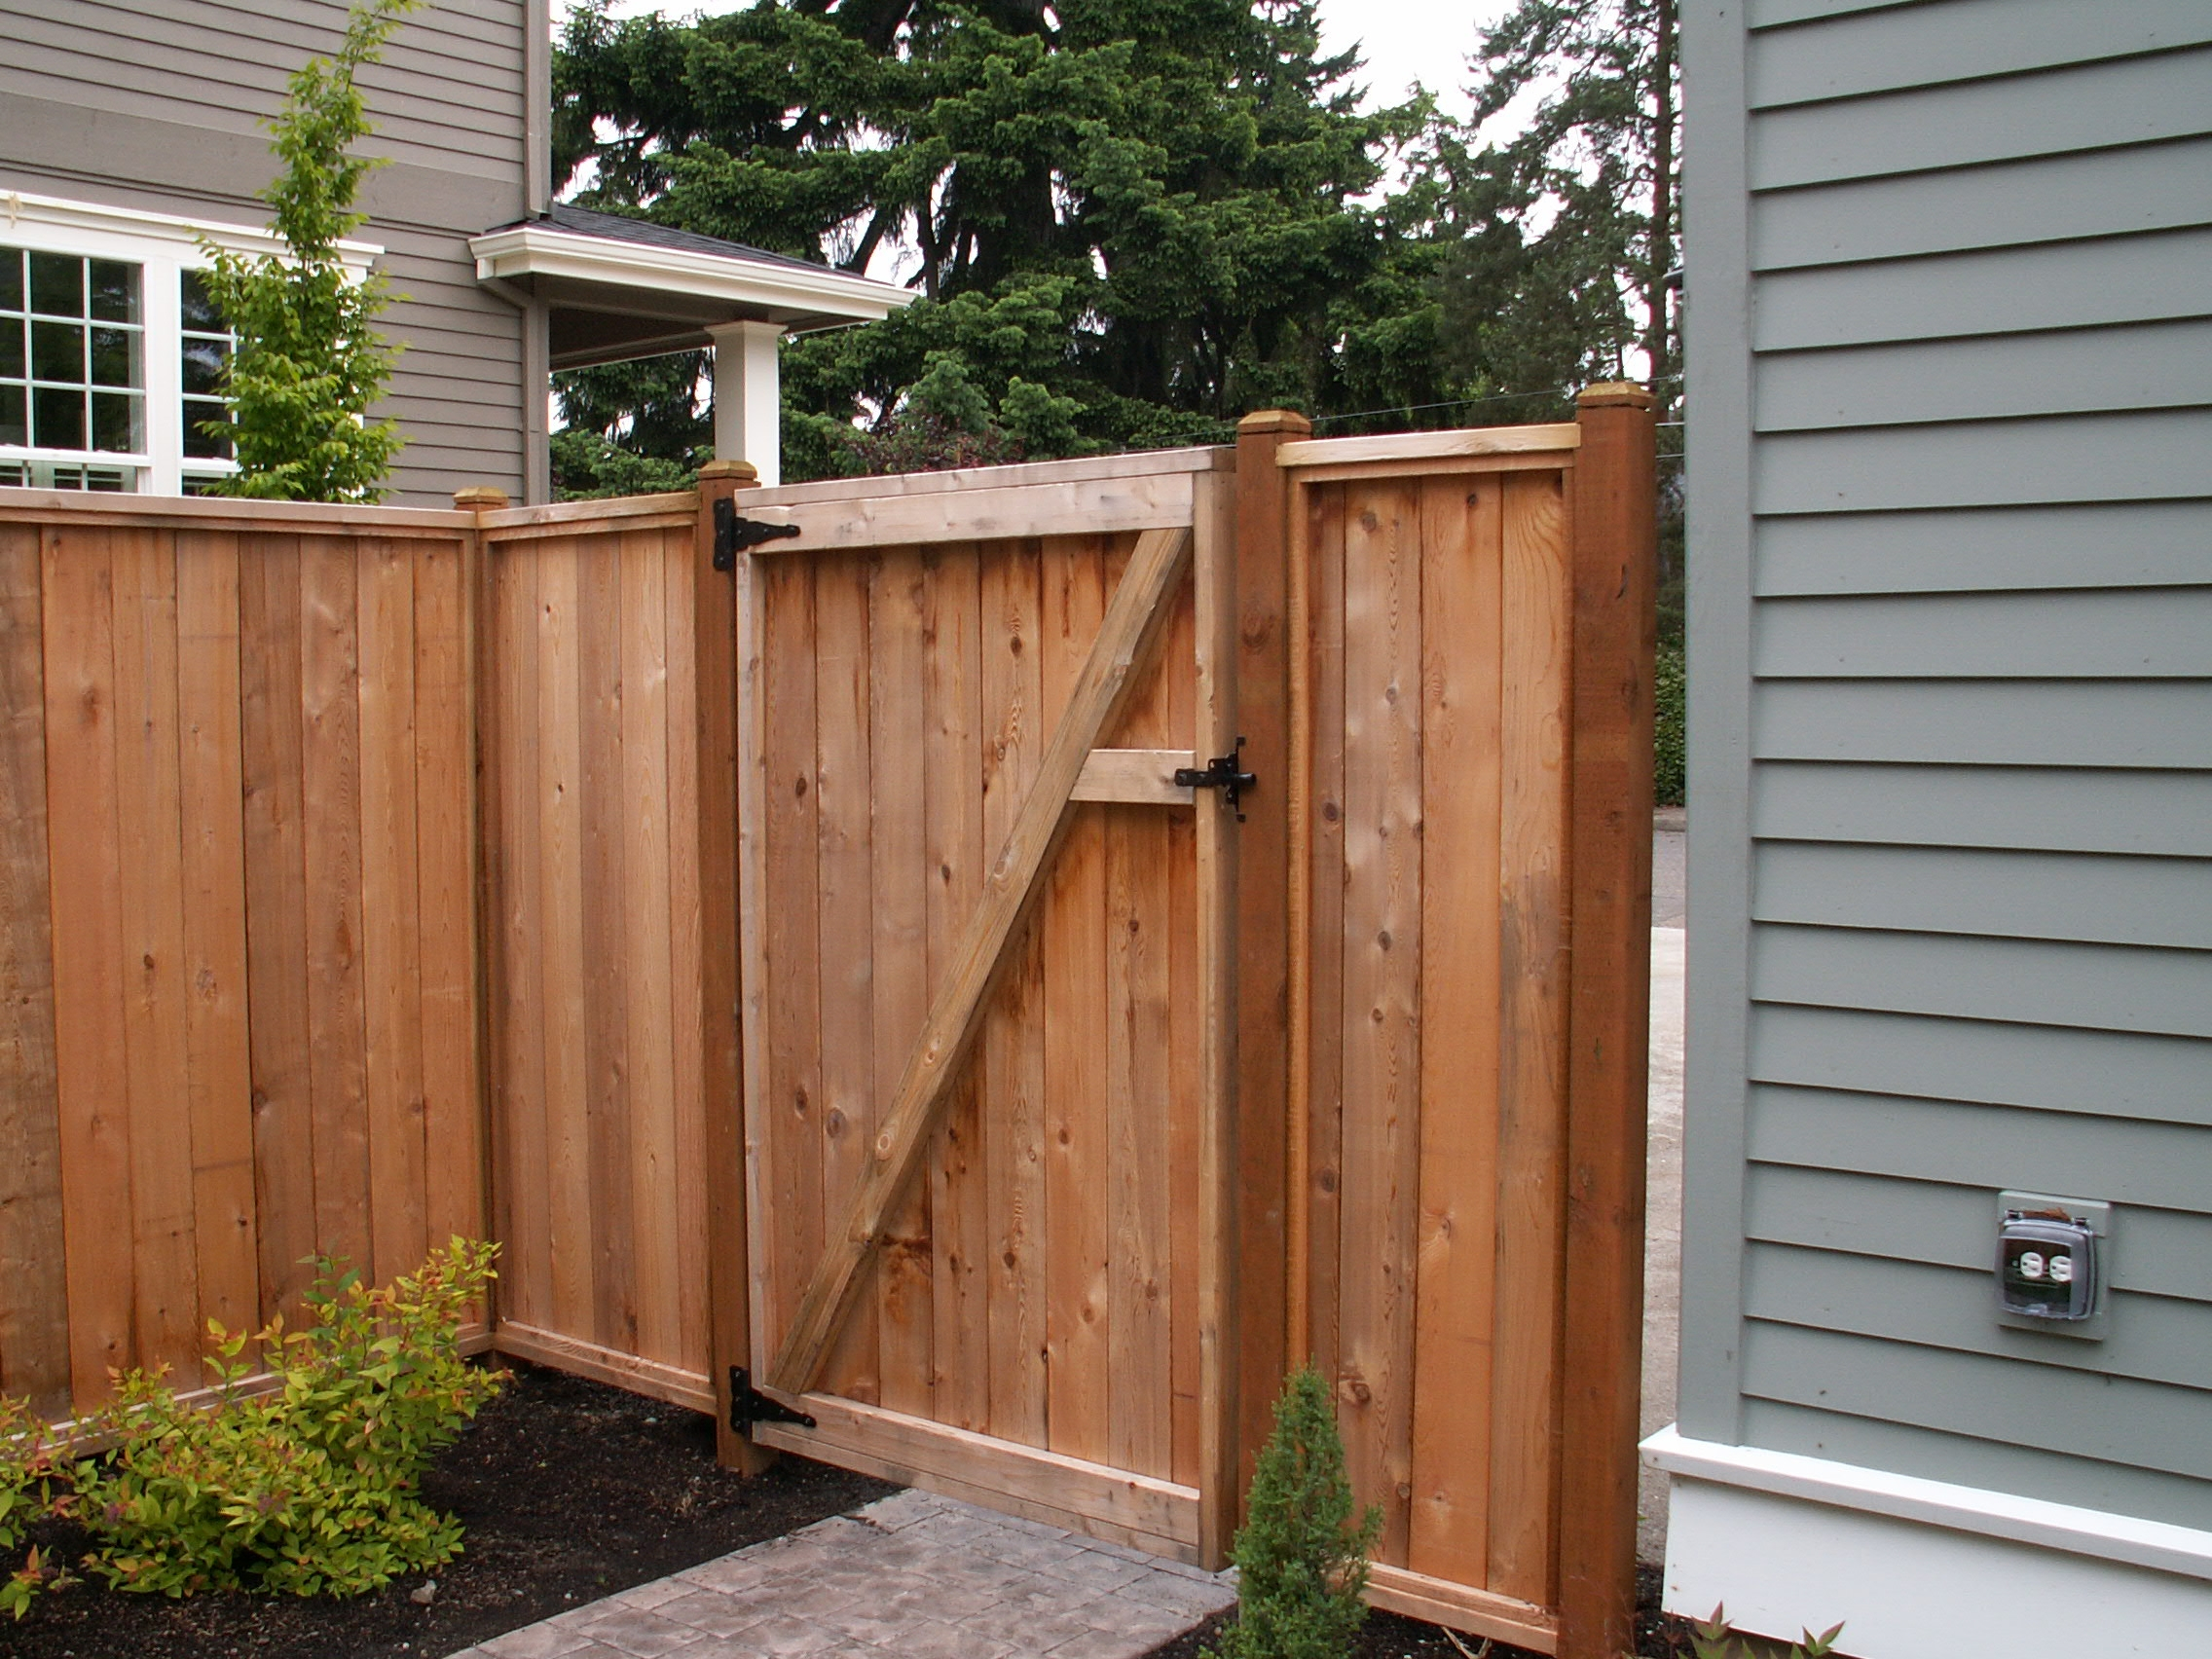 Wood Fences Ideas Stupendous Wooden And Gates Modern Best Hd Photo pertaining to size 2272 X 1704